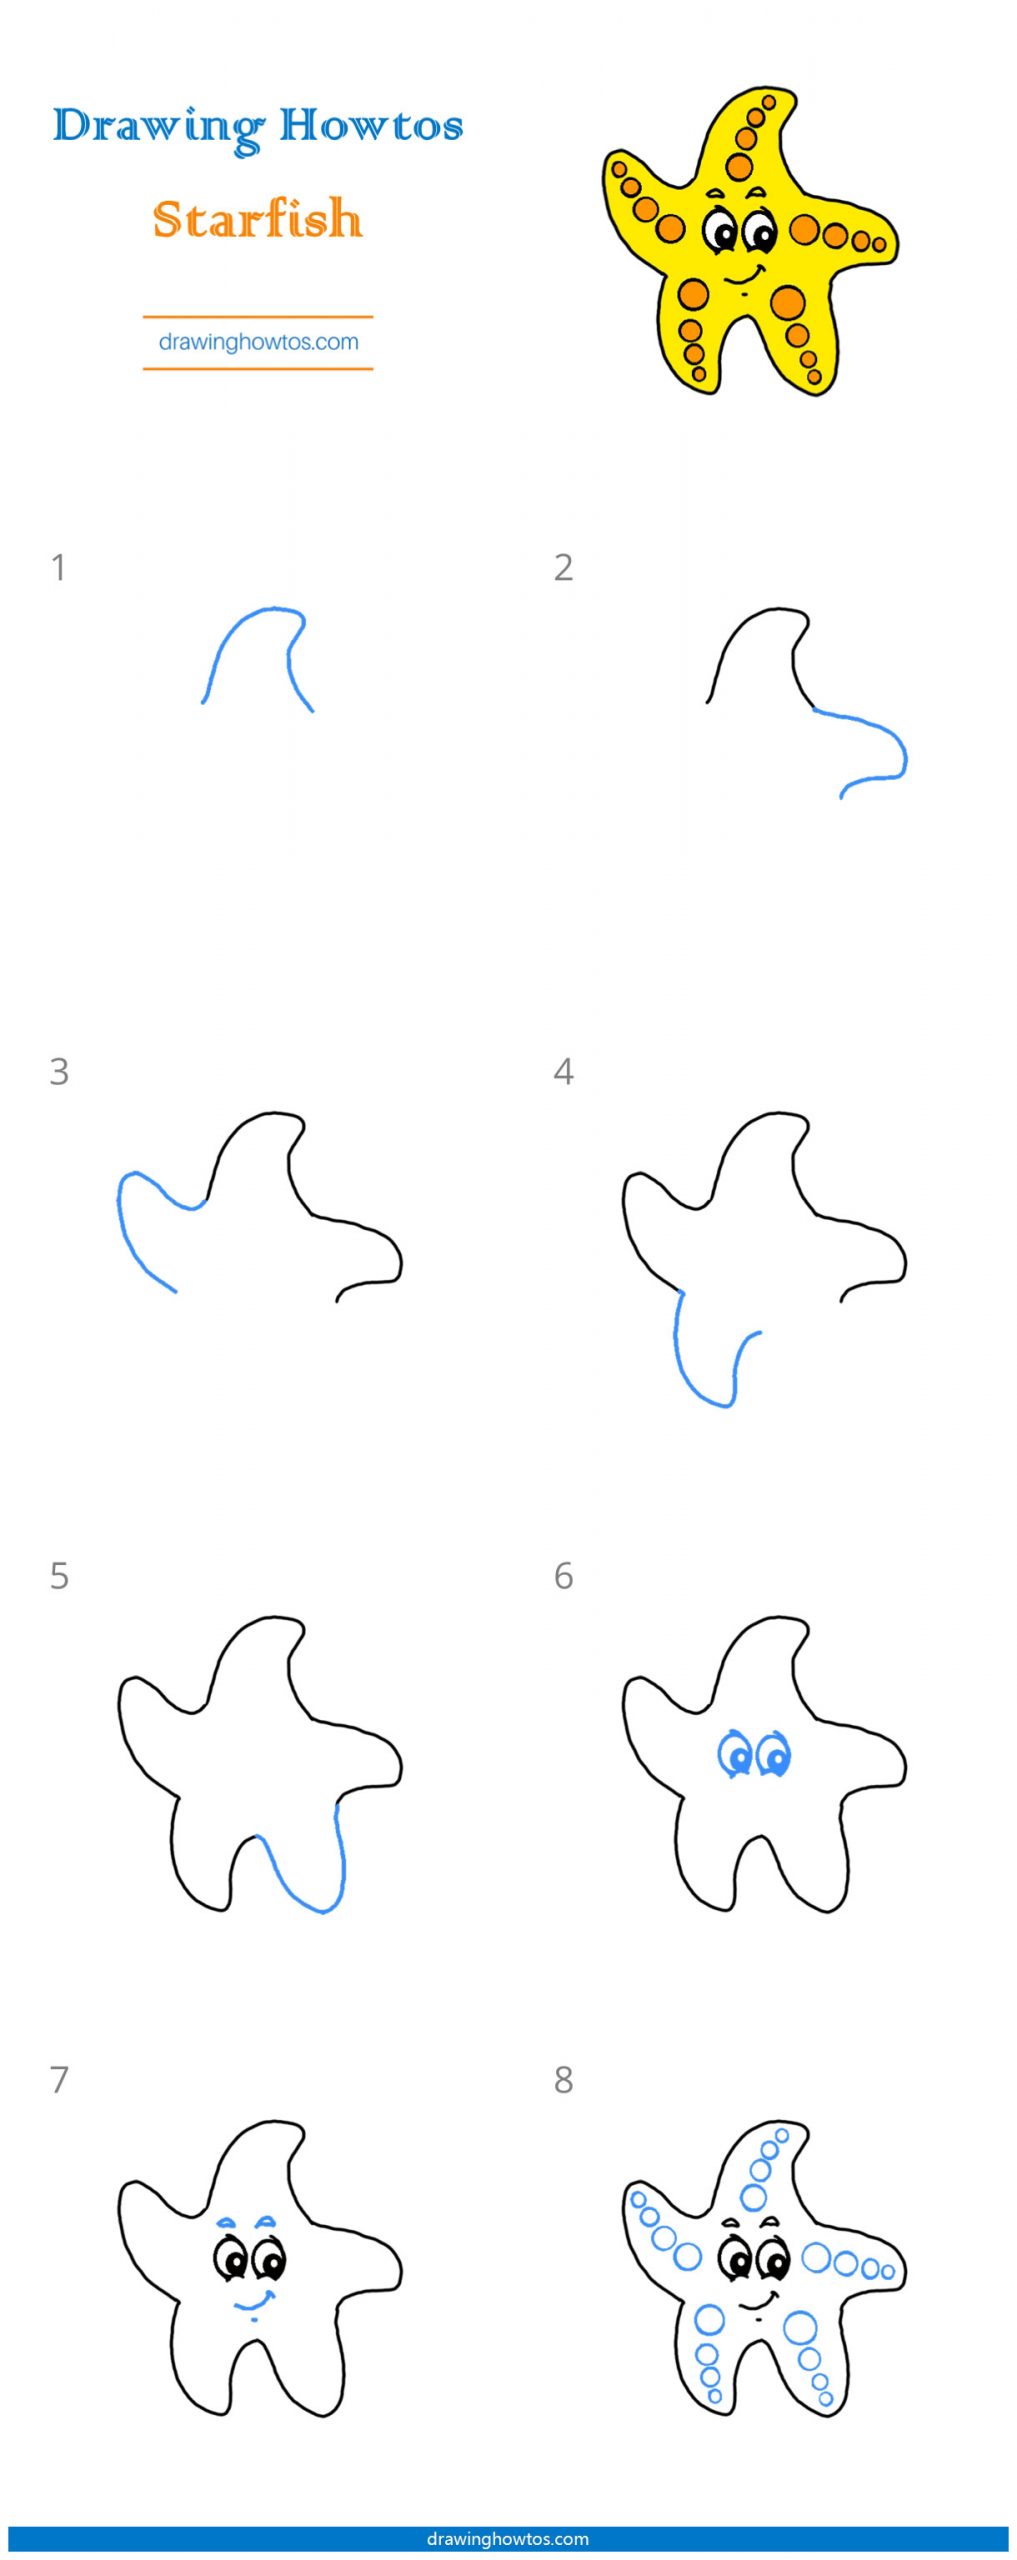 How to Draw a Cute Starfish Step by Step